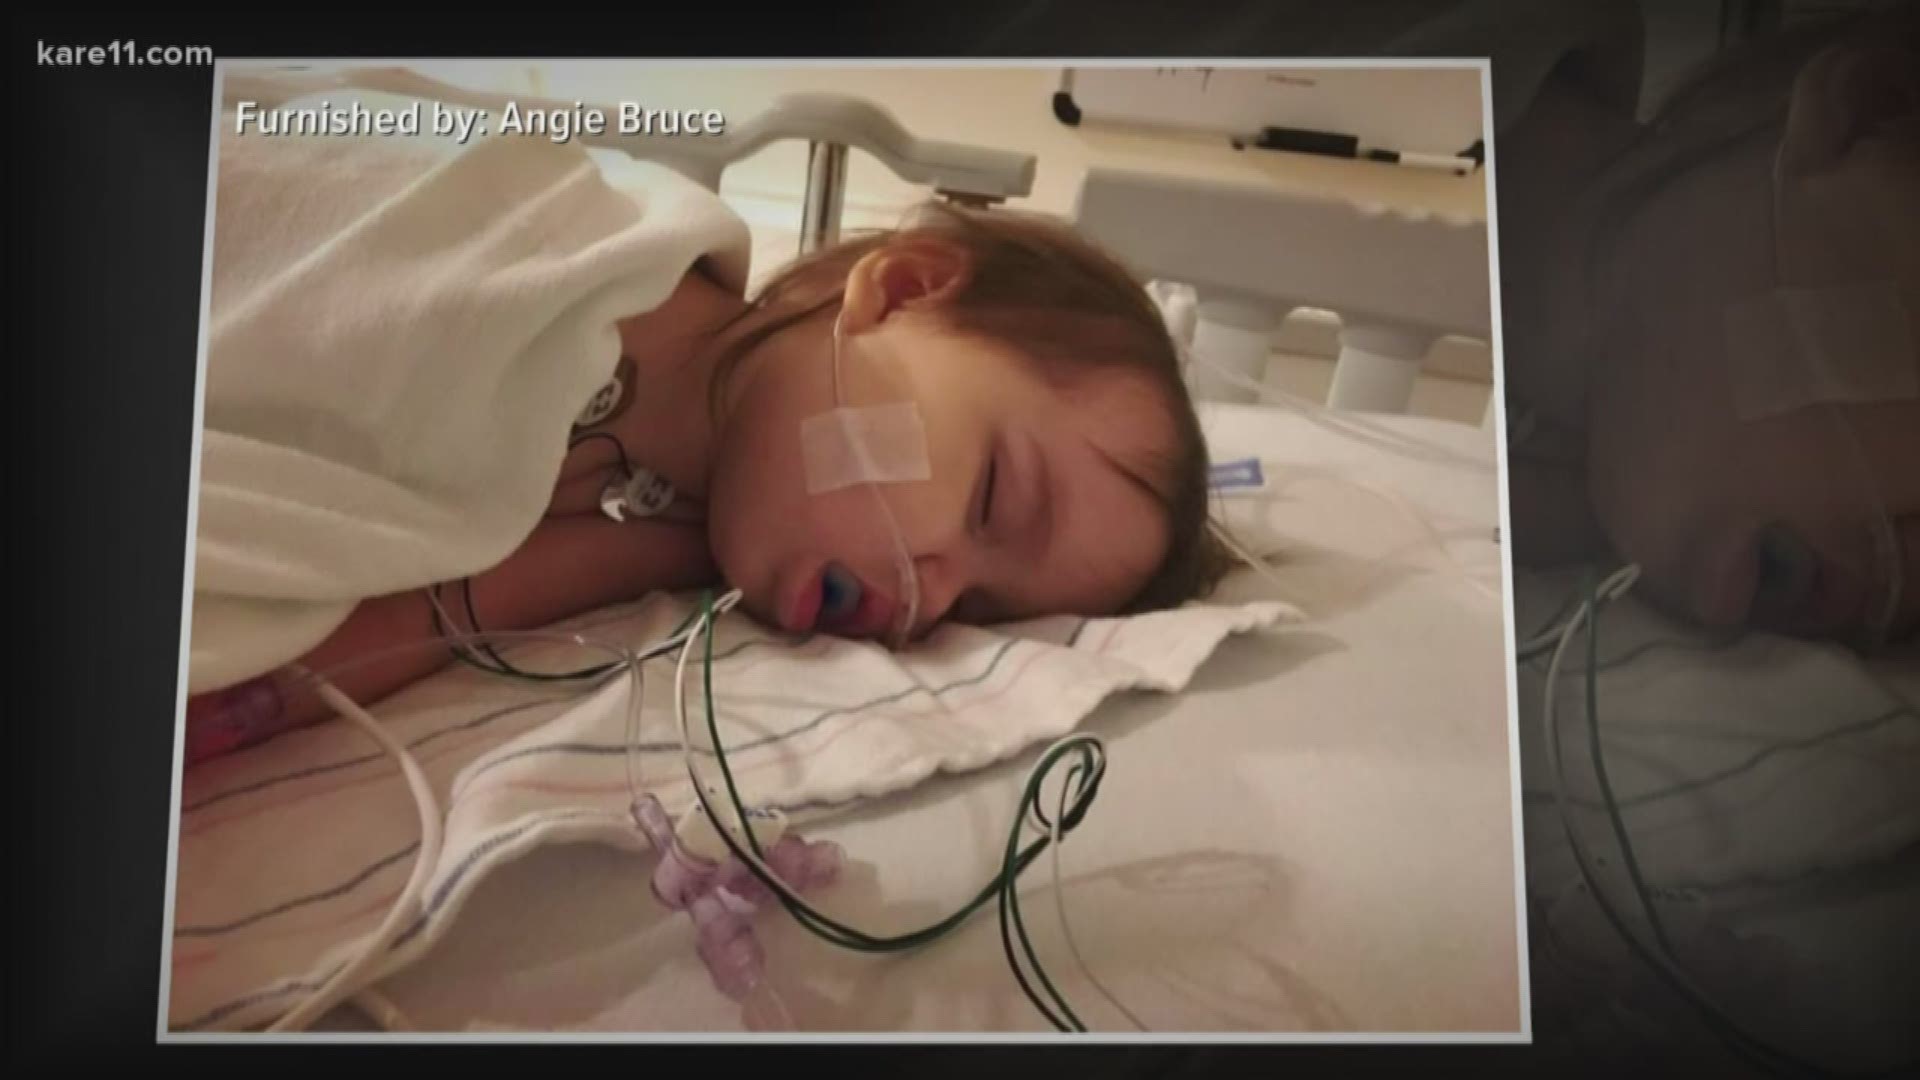 Remember Maddy? KARE 11 followed her mom’s fight for the $2 million drug that could cure her Spinal Muscular Atrophy. Two months later, the results are remarkable.